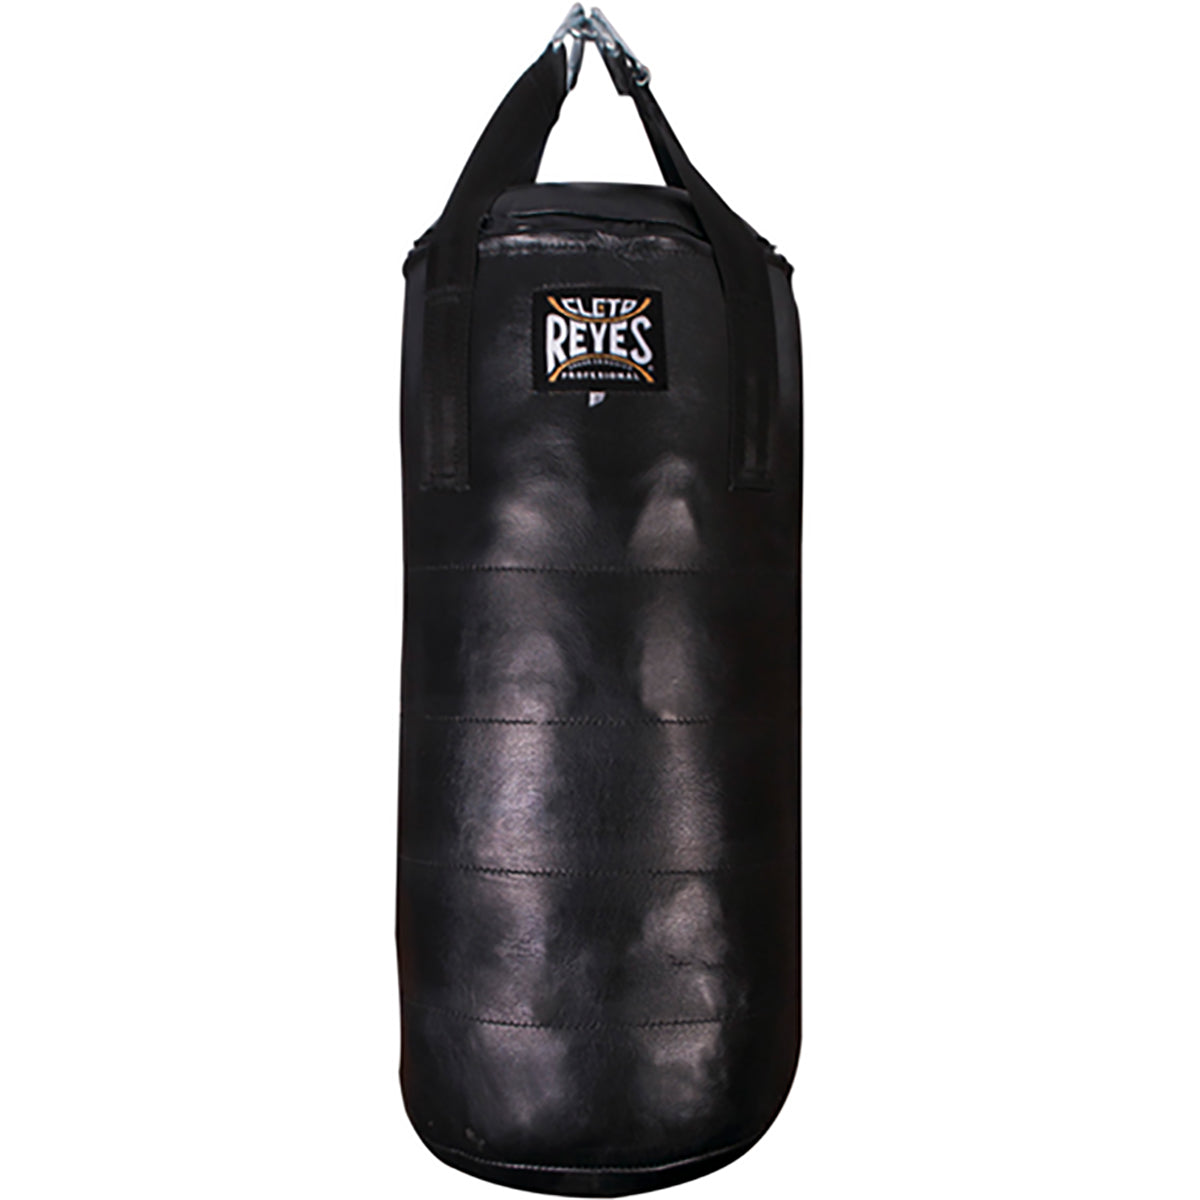 Cleto Reyes Small Cowhide Leather Heavy Bag (Unfilled) - Black Cleto Reyes